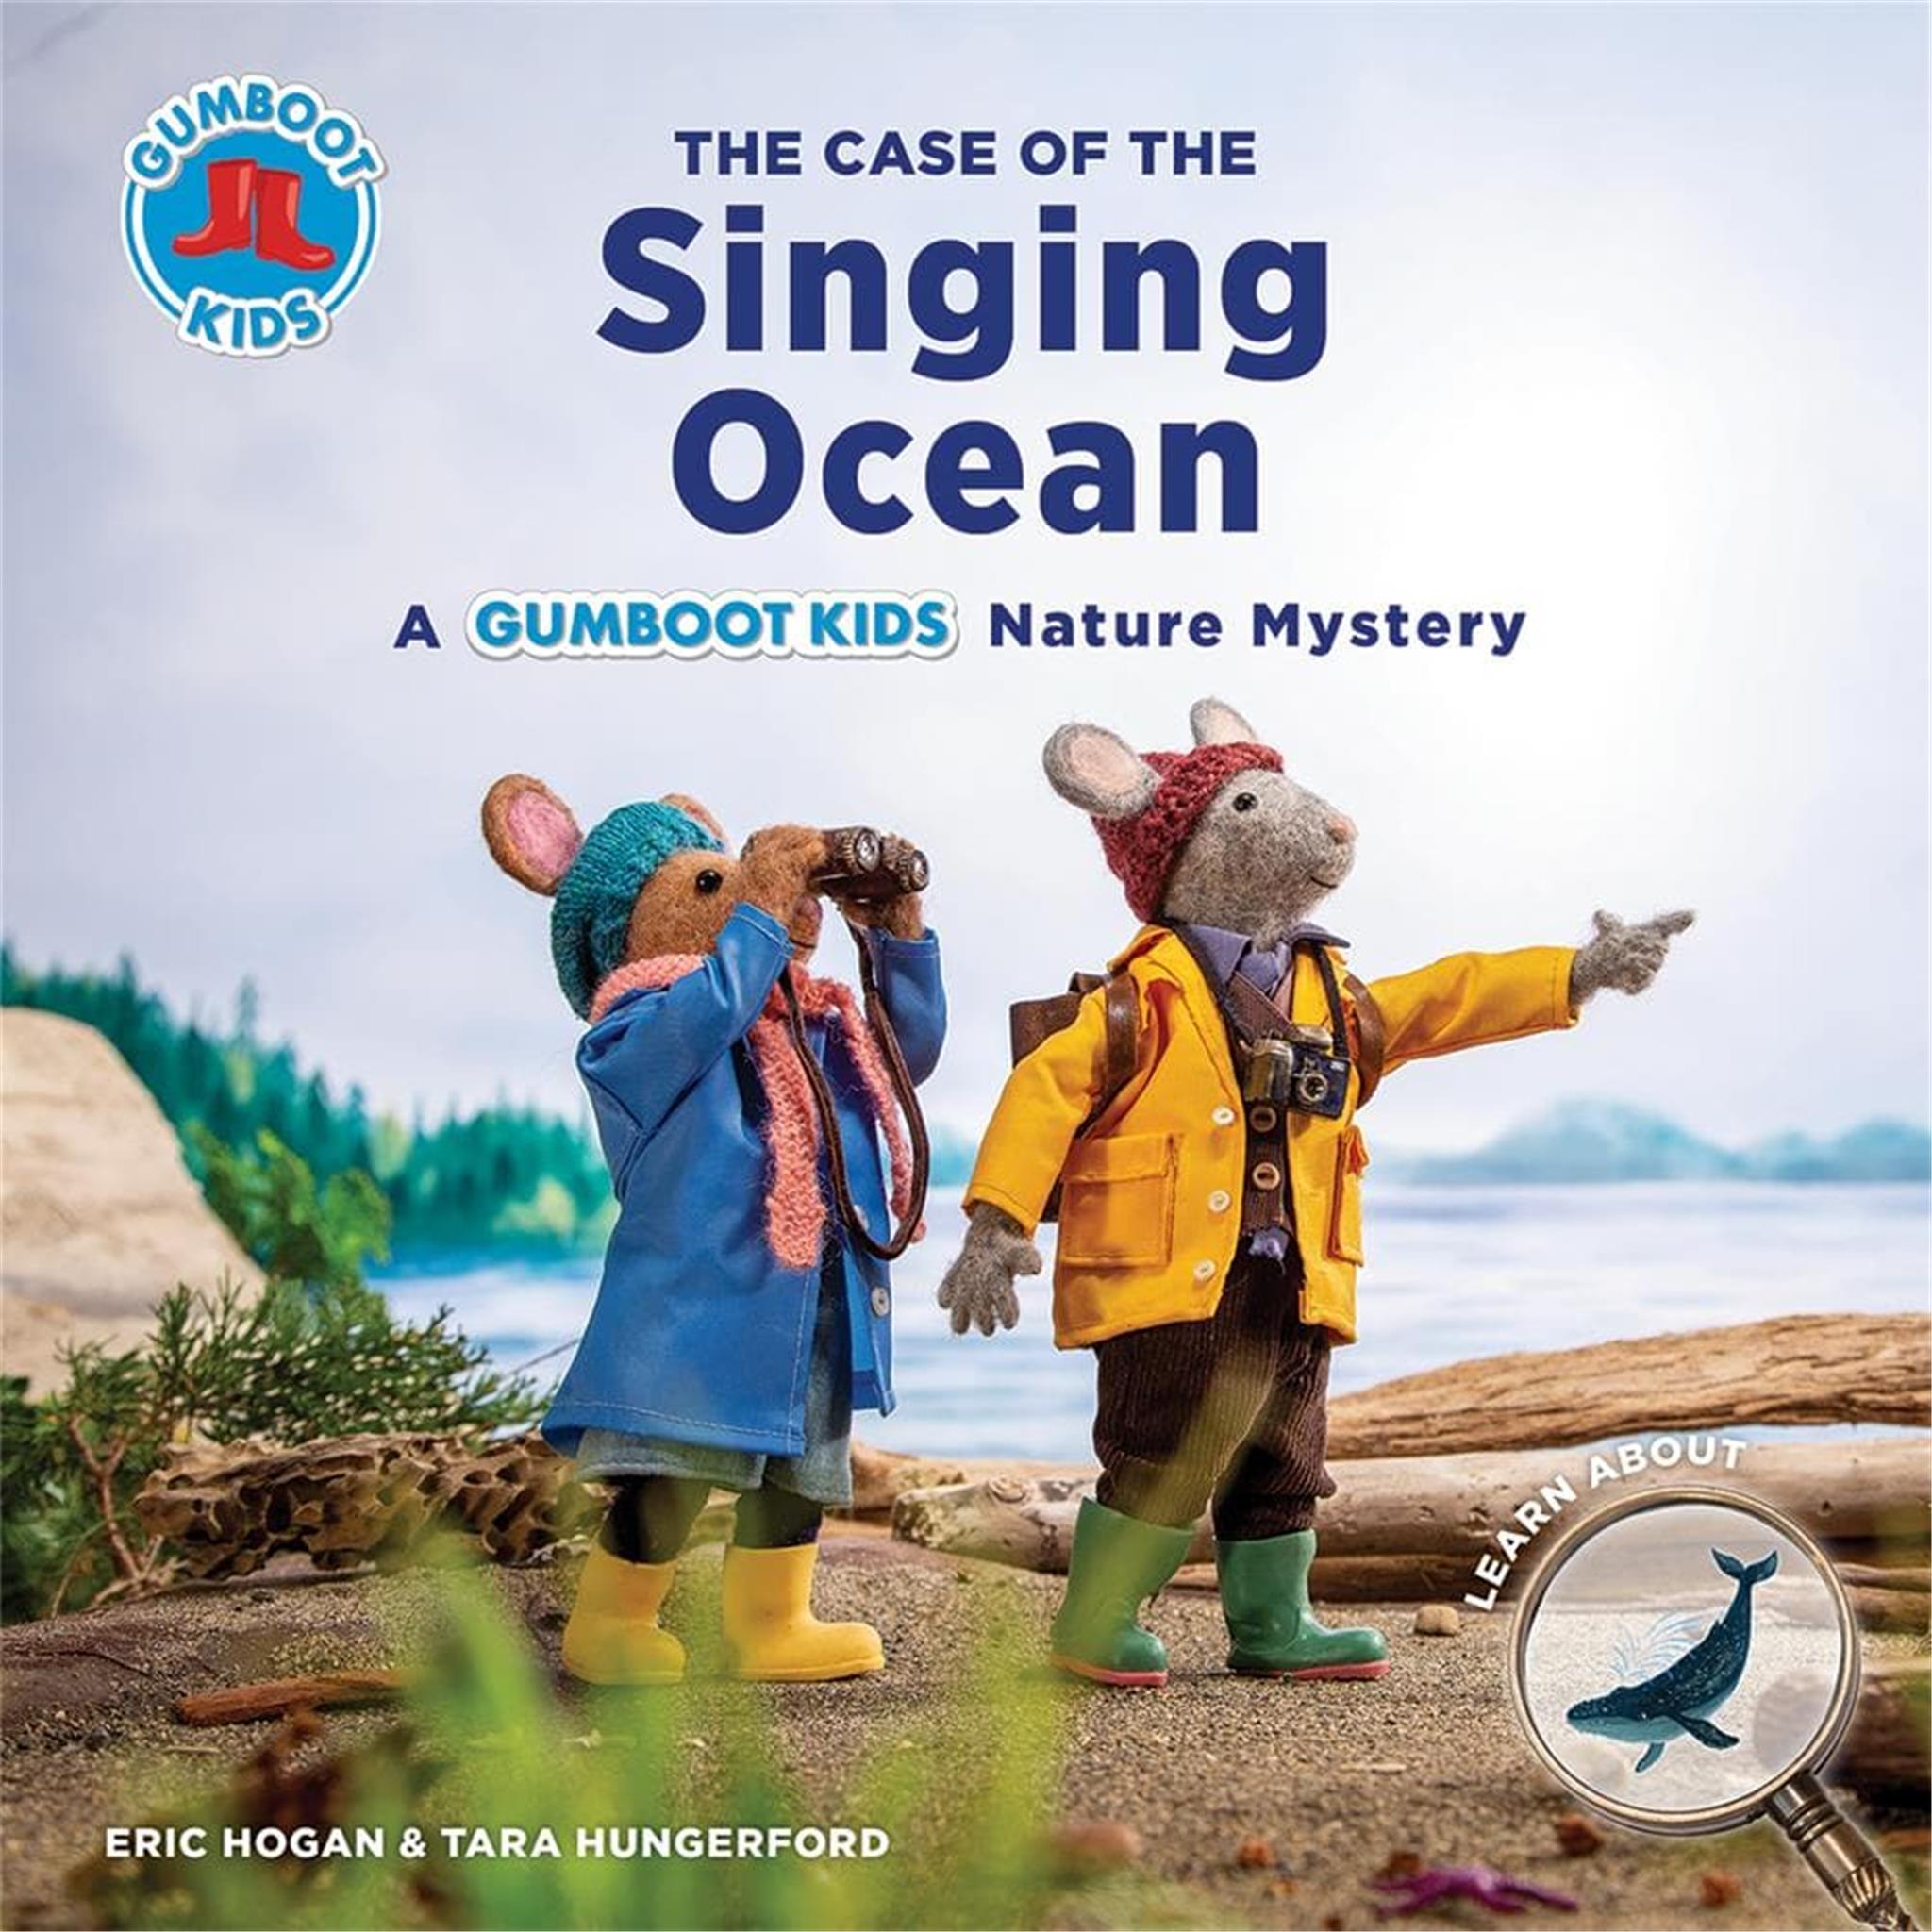 The Case of the Singing Ocean: A Gumboot Kids Nature Mystery Book